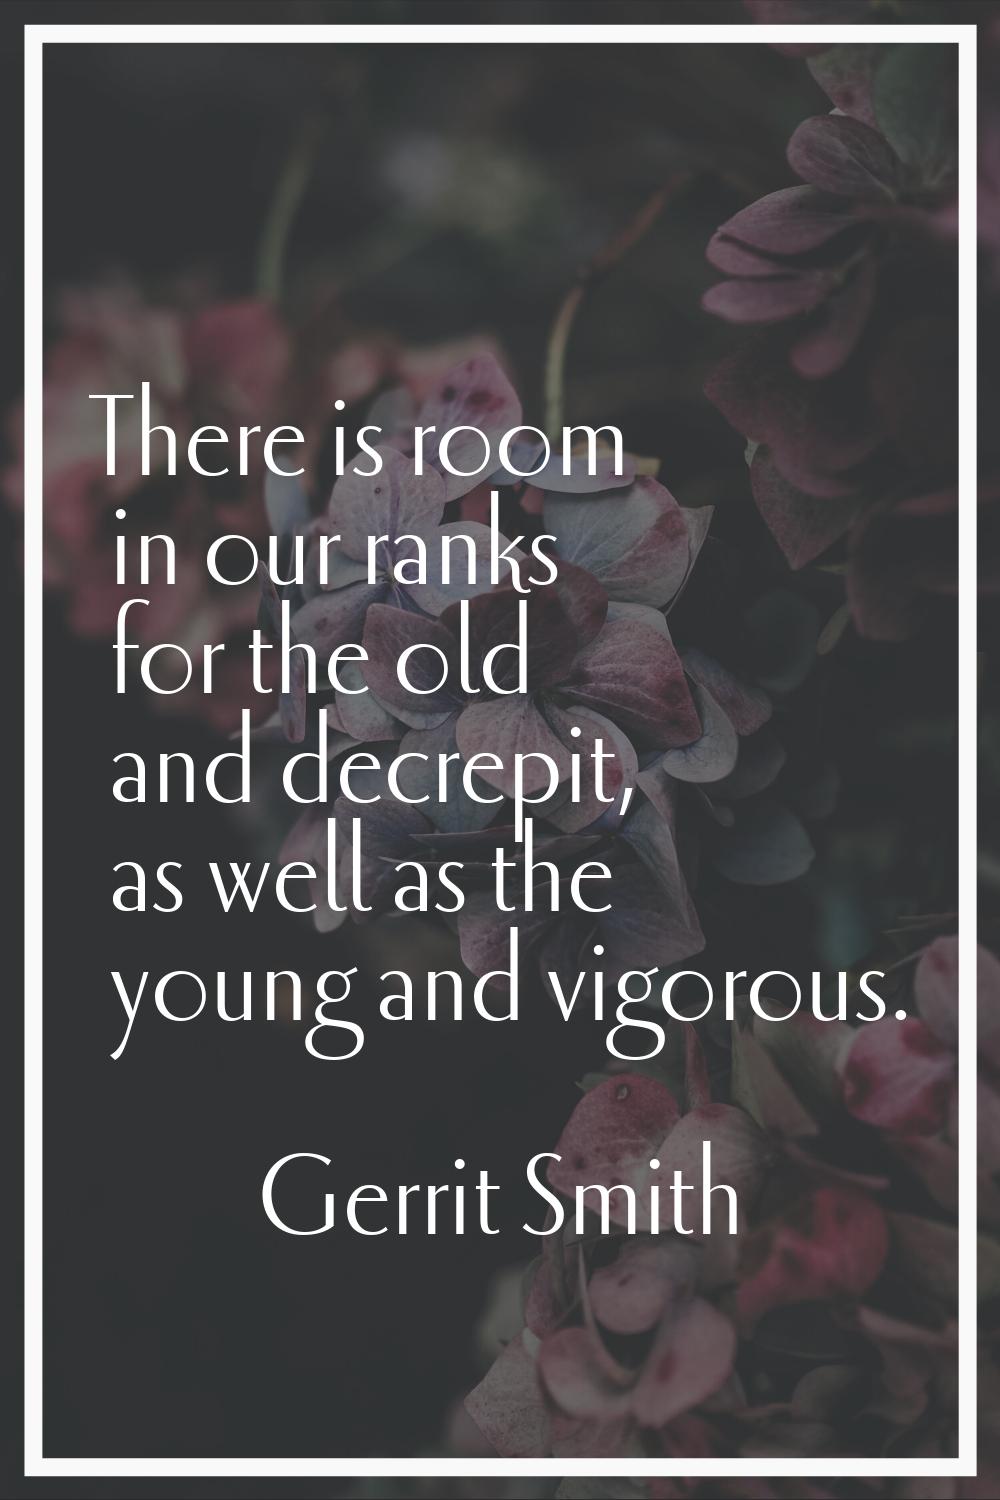 There is room in our ranks for the old and decrepit, as well as the young and vigorous.